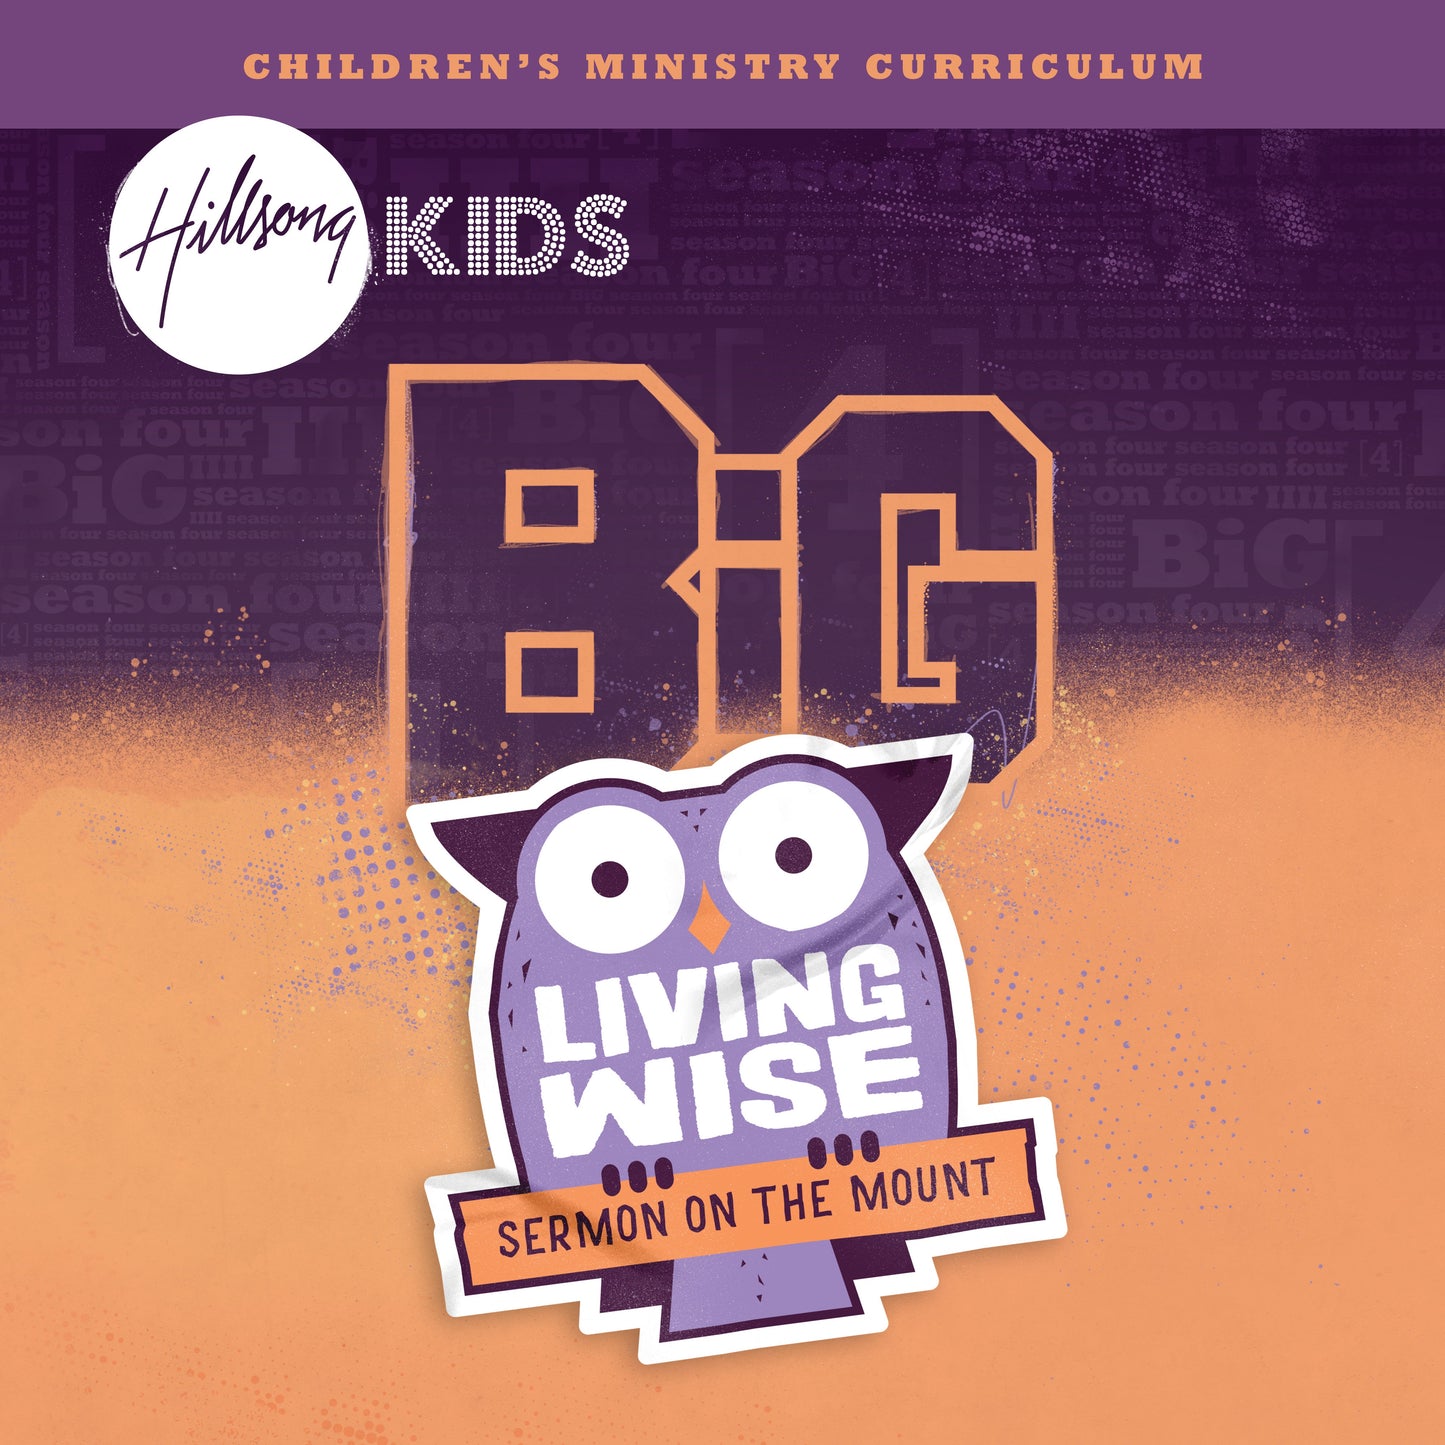 BiG Living Wise - Sermon On The Mount Curriculum